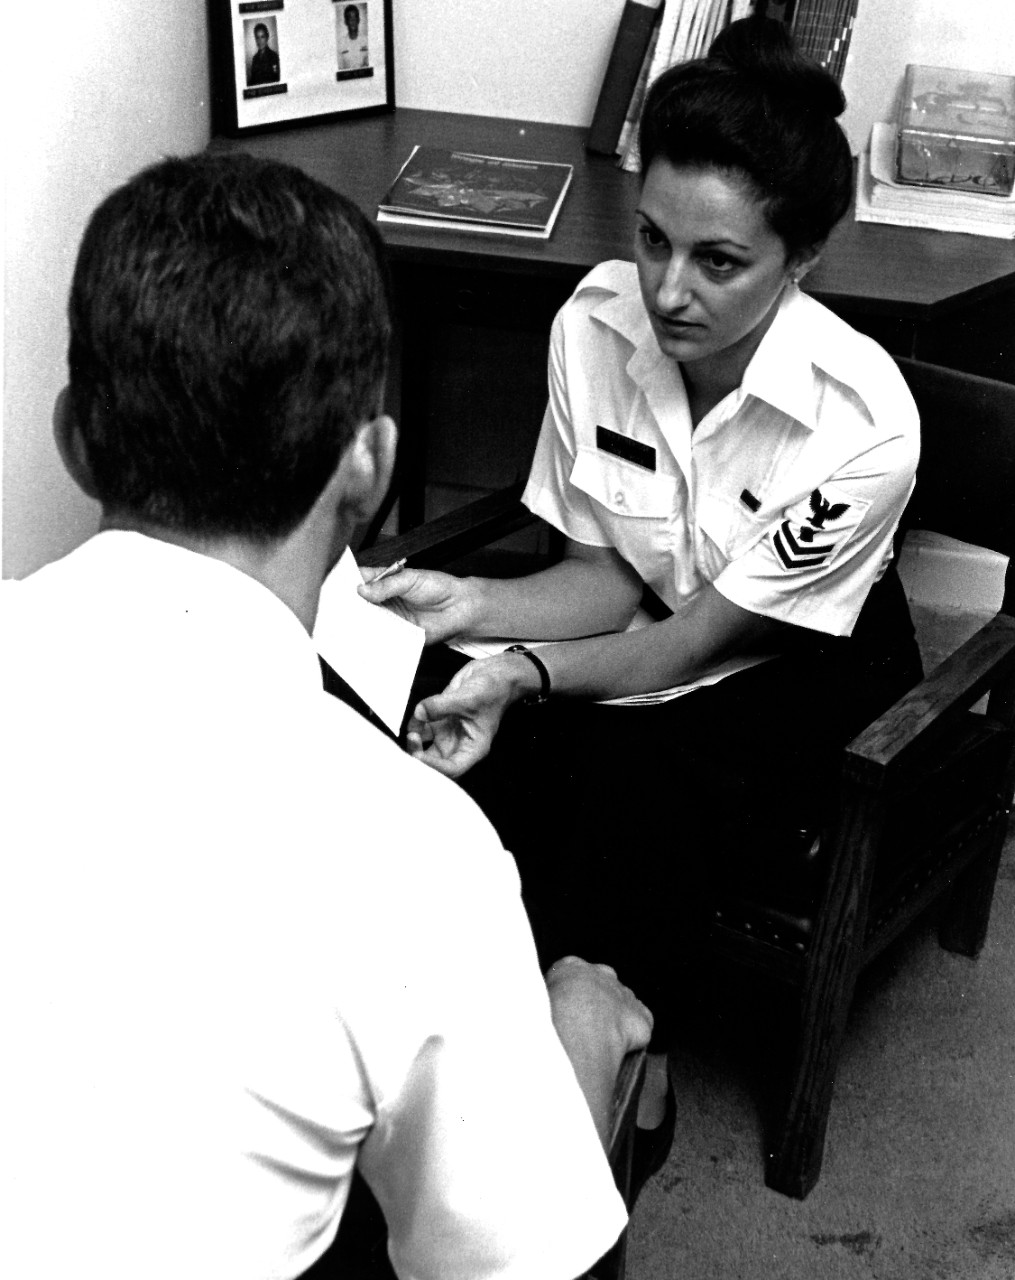 330-CFD-DN-SN-84-01330:   Petty Officer Second Class Kathy Russo Etheridge, February 1983.   Etheridge, a Drug and Alcohol Abuse Counselor, discusses problems with a Navy person seeking her help.  Photographed by PH1 Carolyn Harris, February 1, 1983.  Official U.S. Navy photograph, now in the collections of the National Archives.  